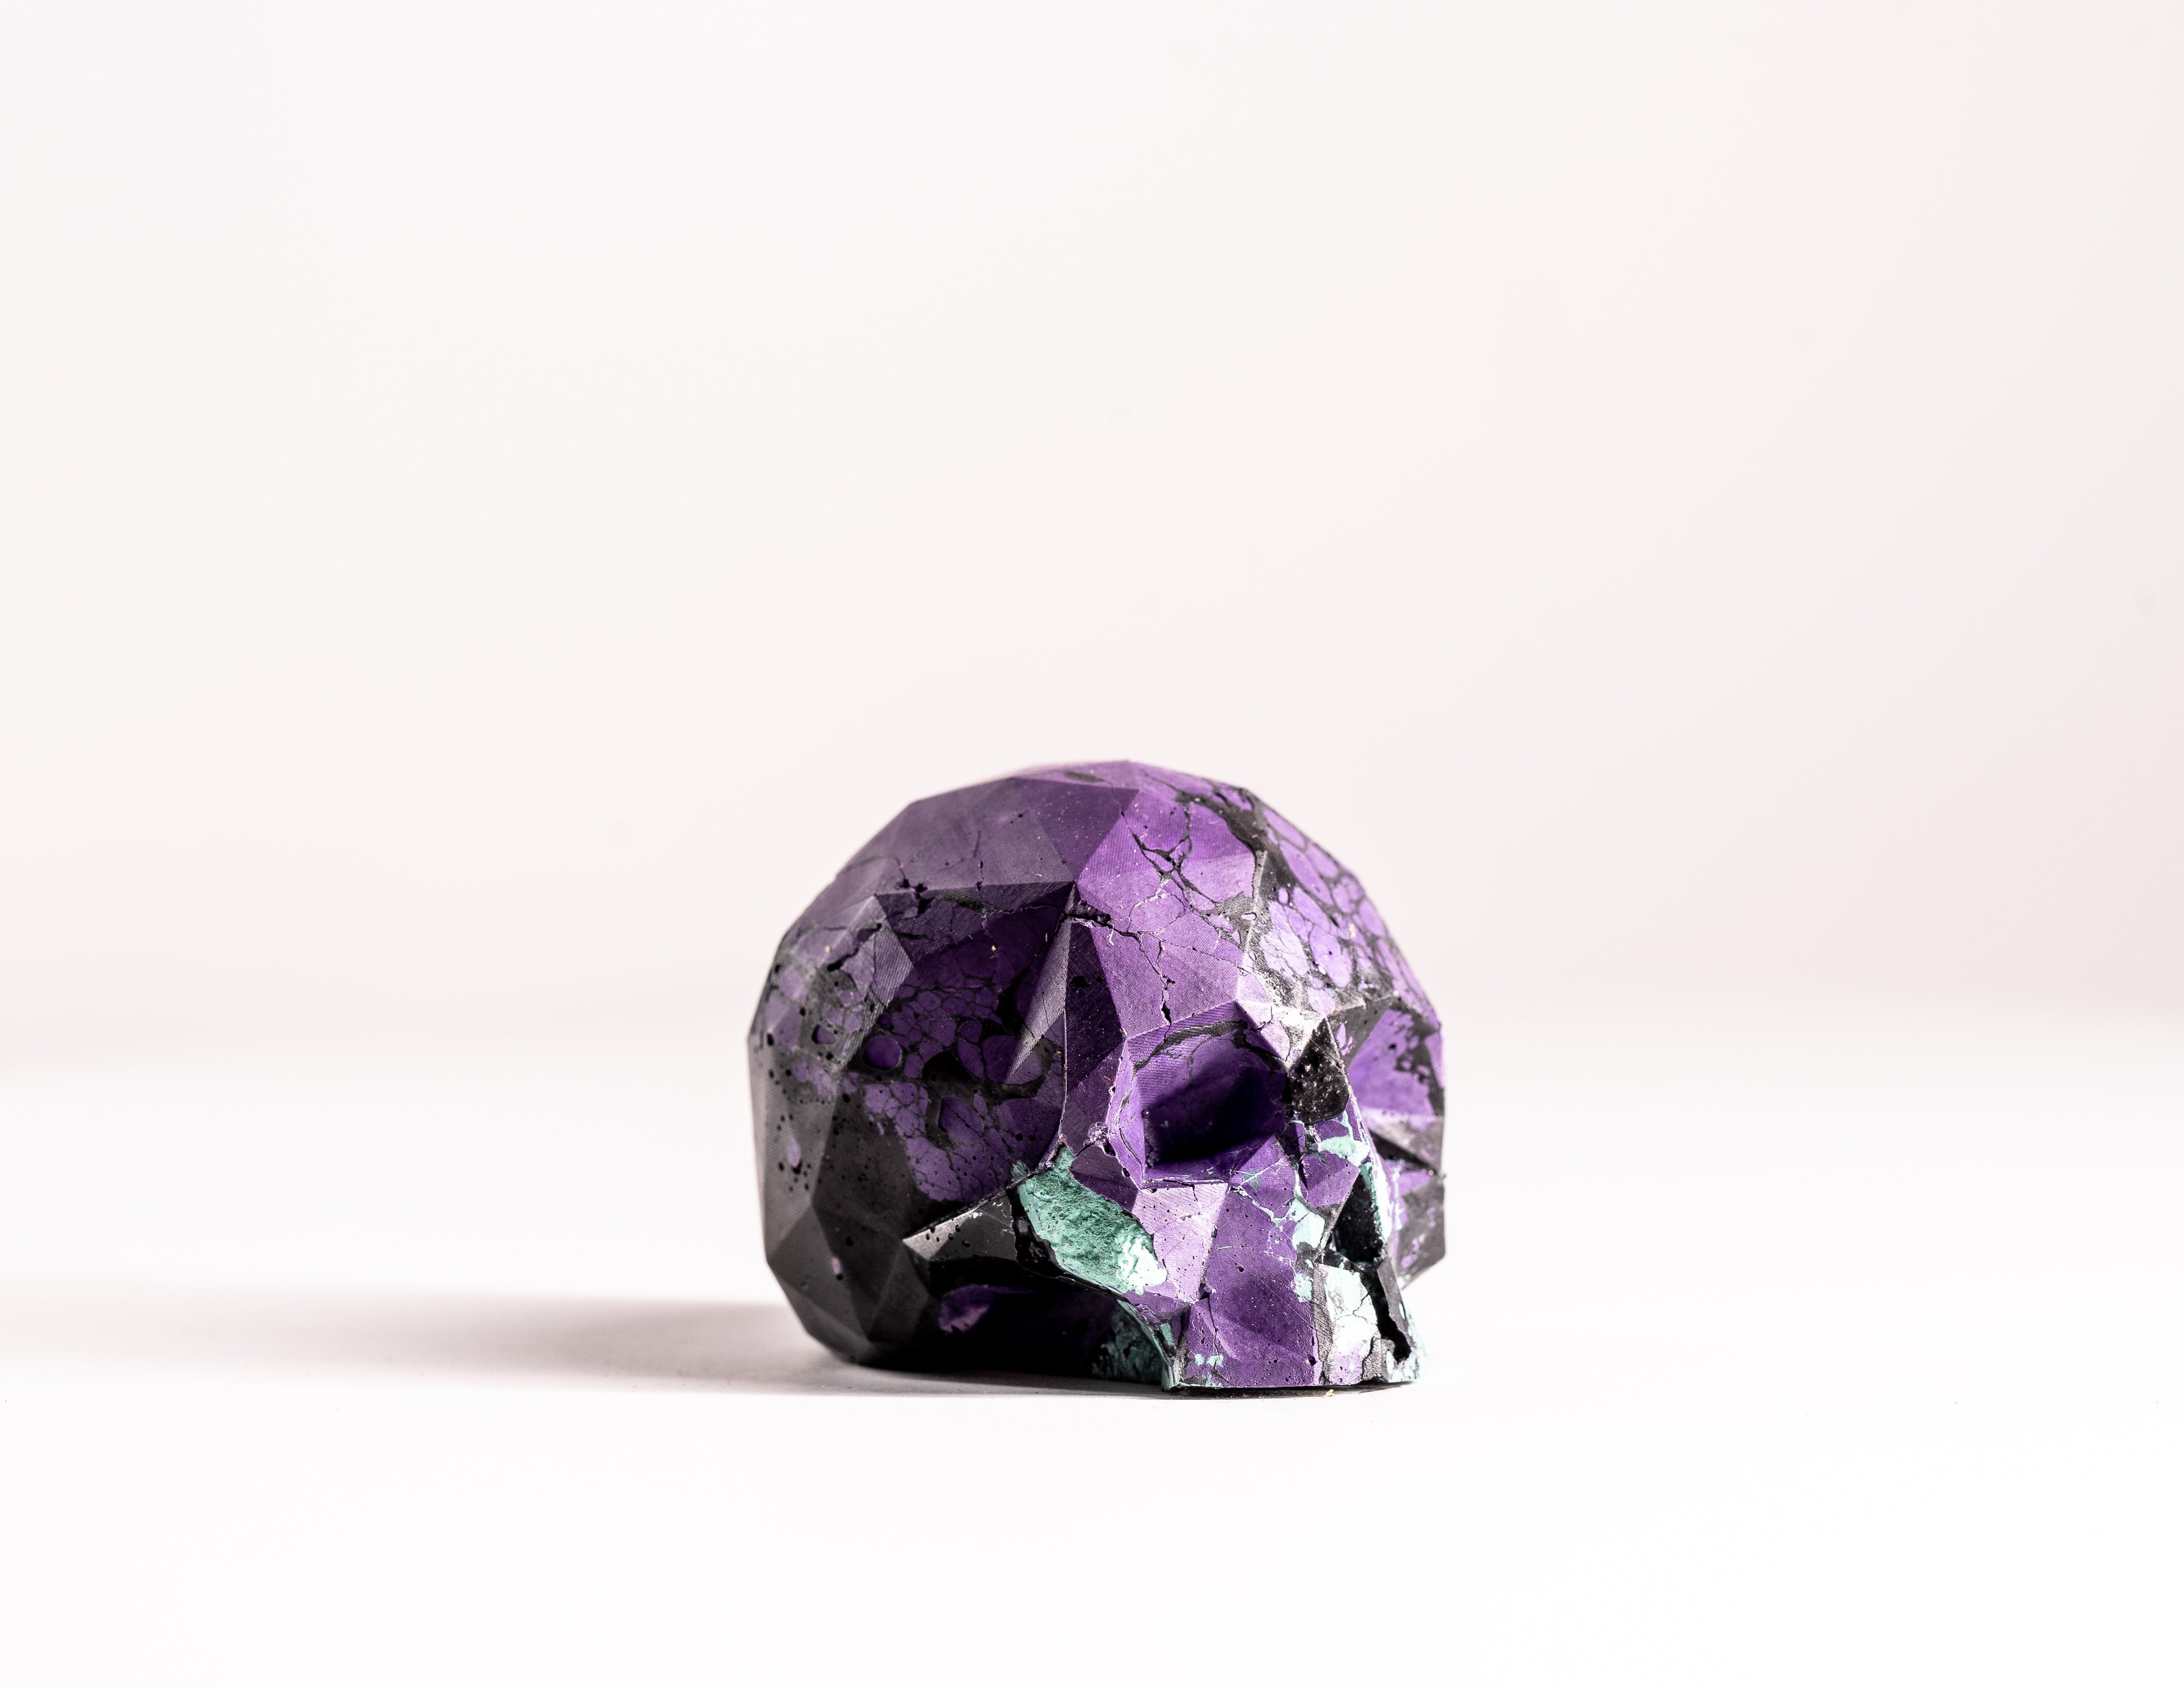 Mini Collectible Skull - Marbled - 70